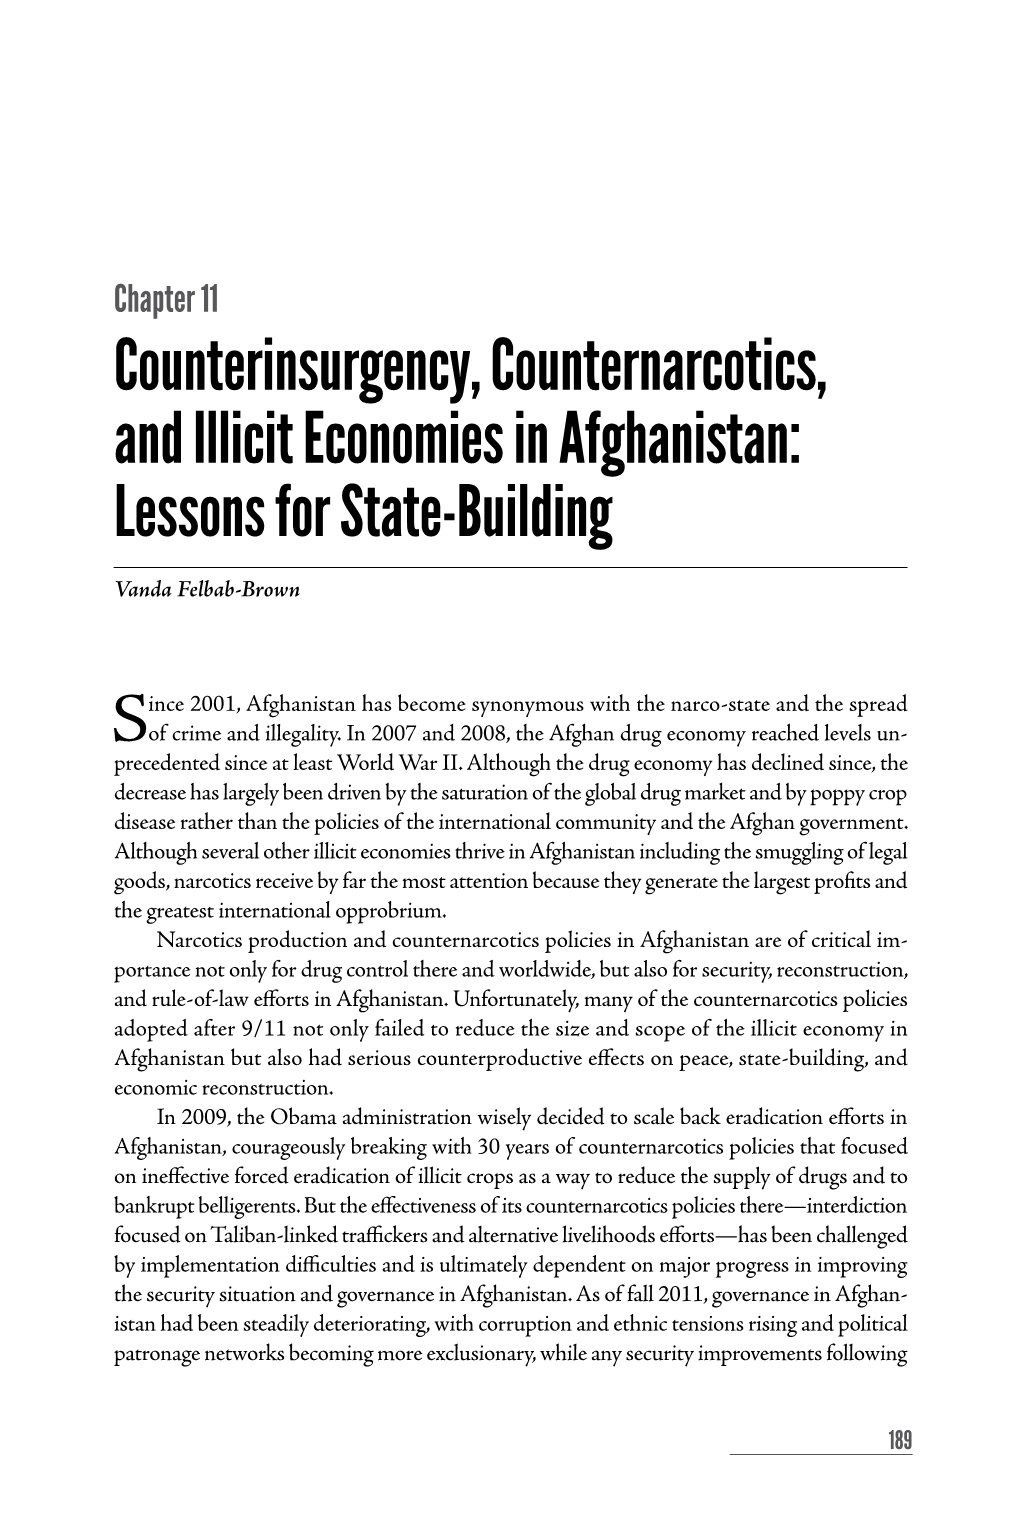 Counterinsurgency, Counternarcotics, and Illicit Economies in Afghanistan: Lessons for State-Building